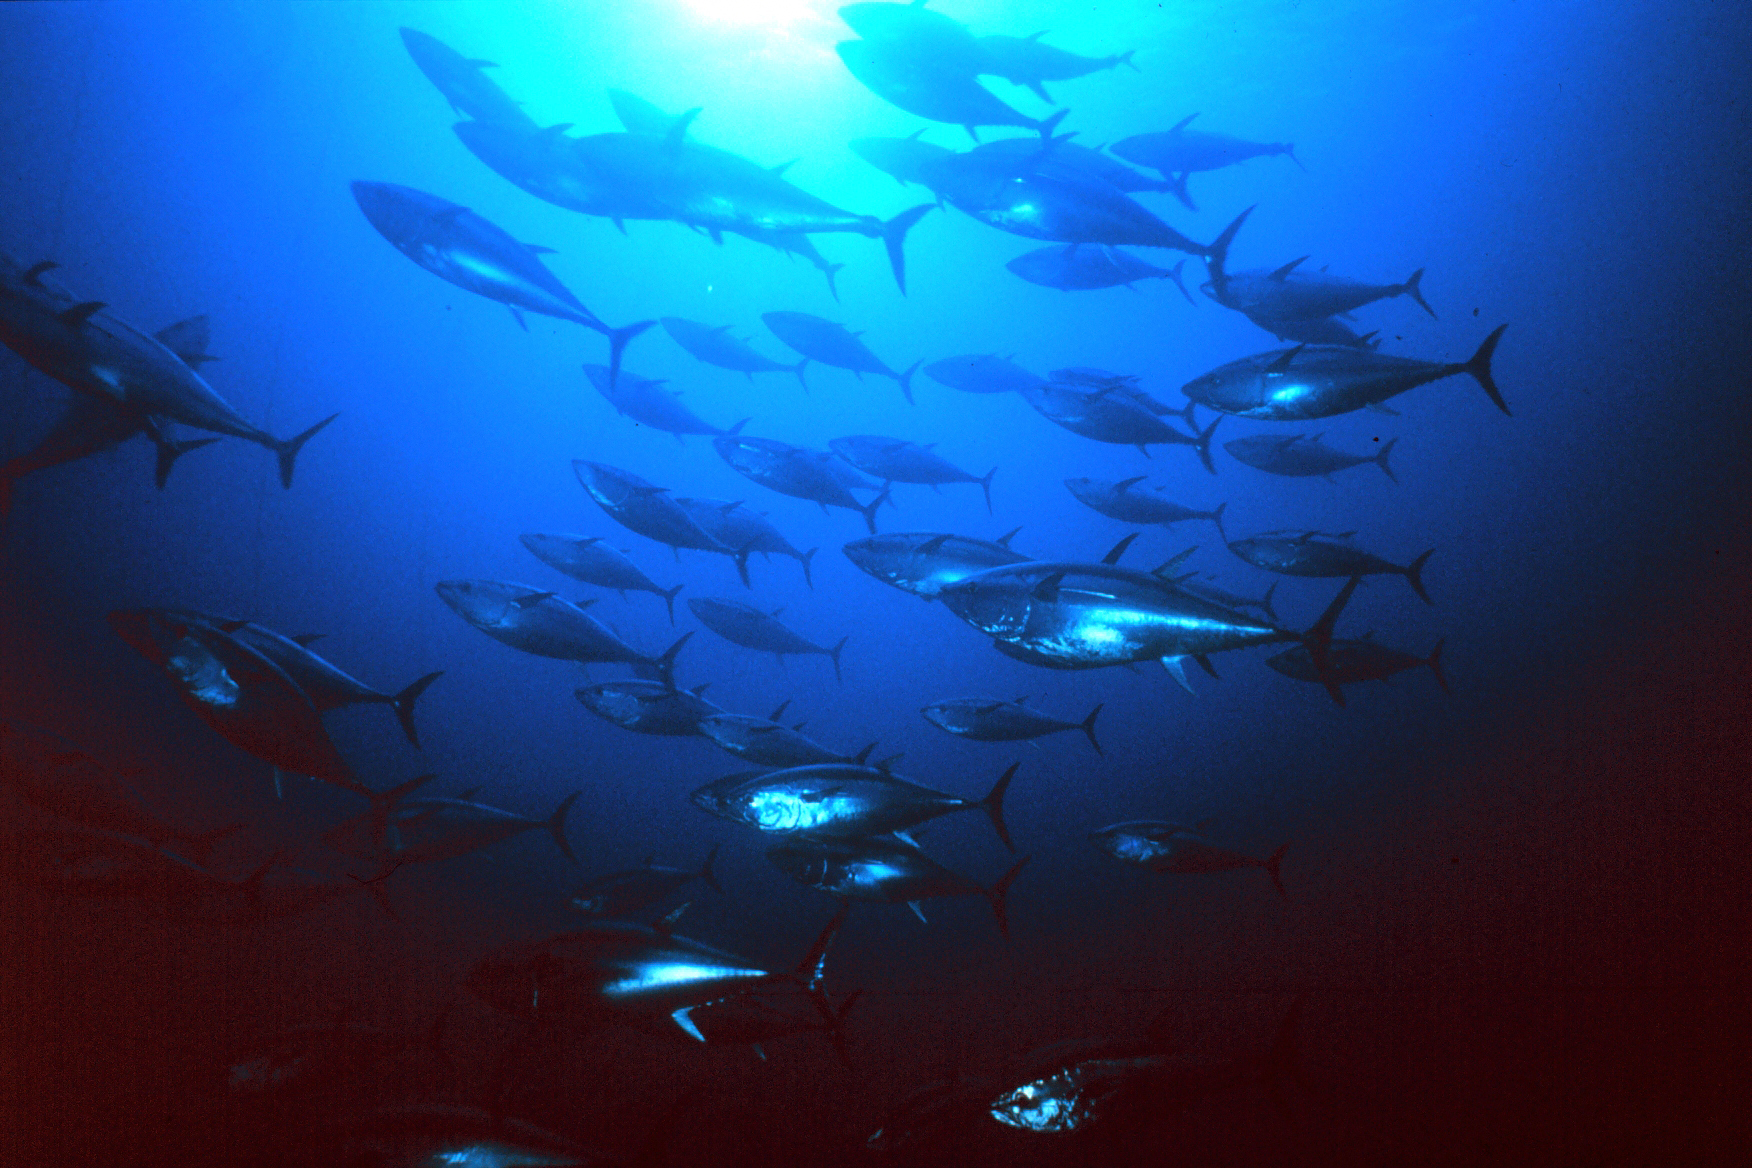 Bluefin tuna grow slowly, taking about 8 years to reach maturity, and can reach up to 13 feet long and 2,000 pounds.